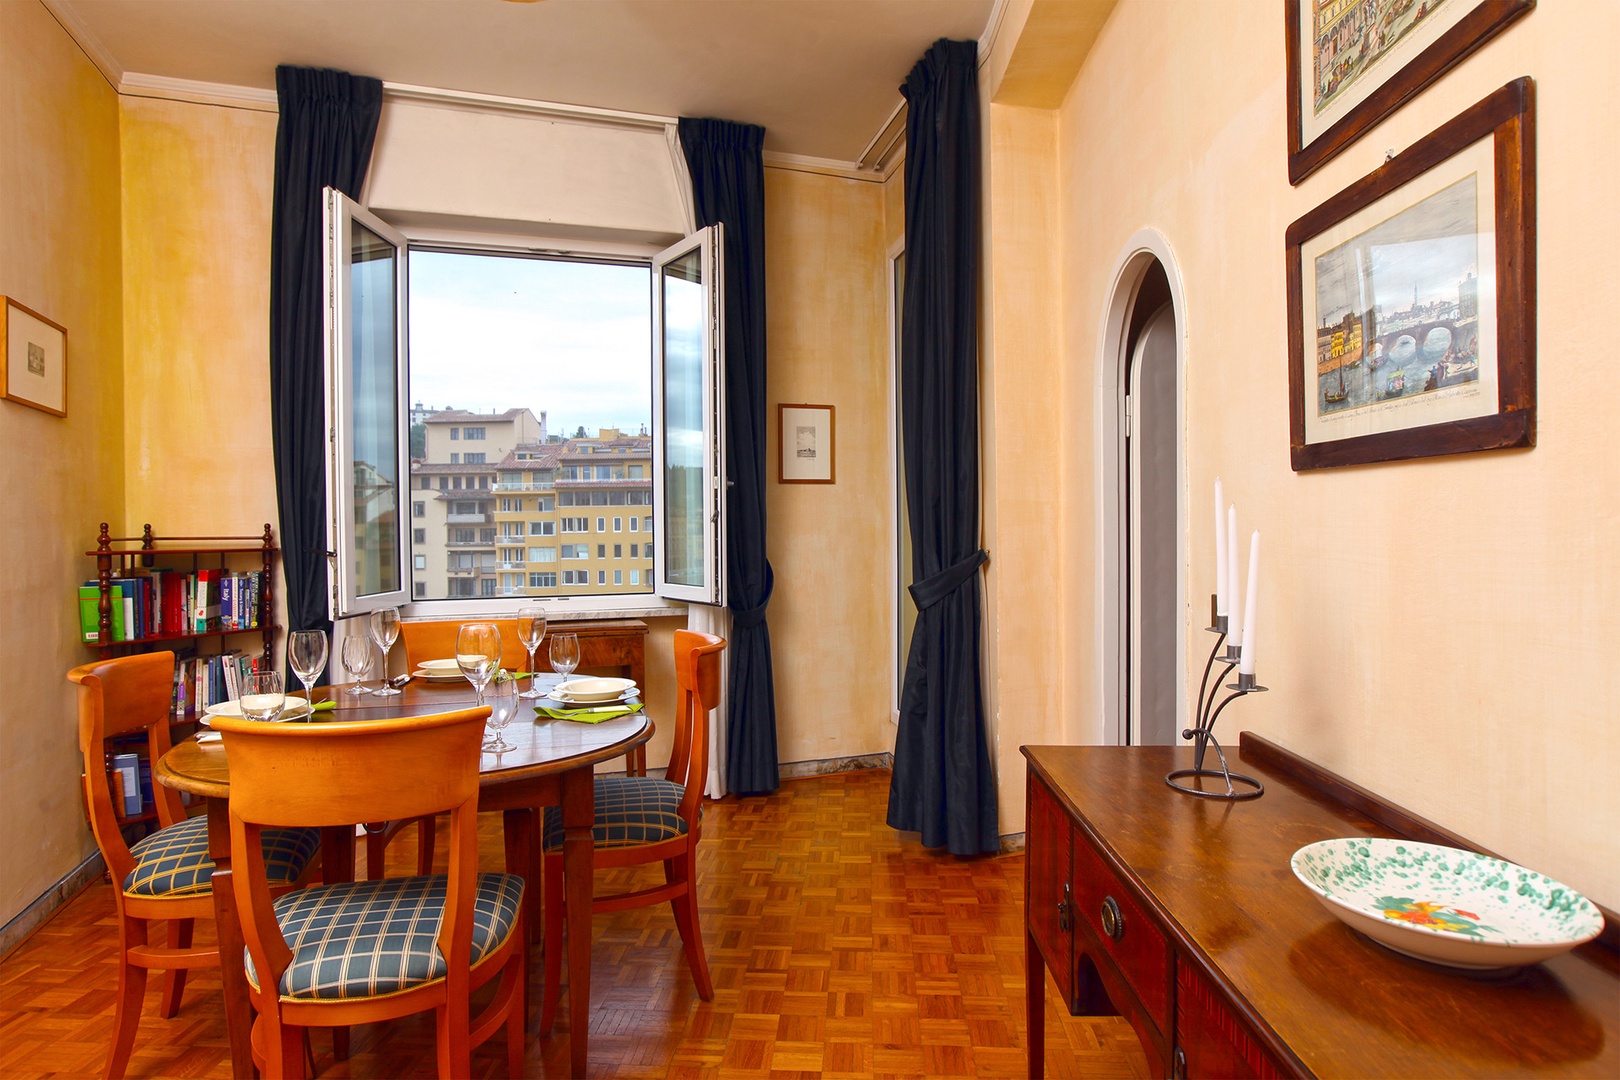 Dining room also has views out to the Arno river and terrace.